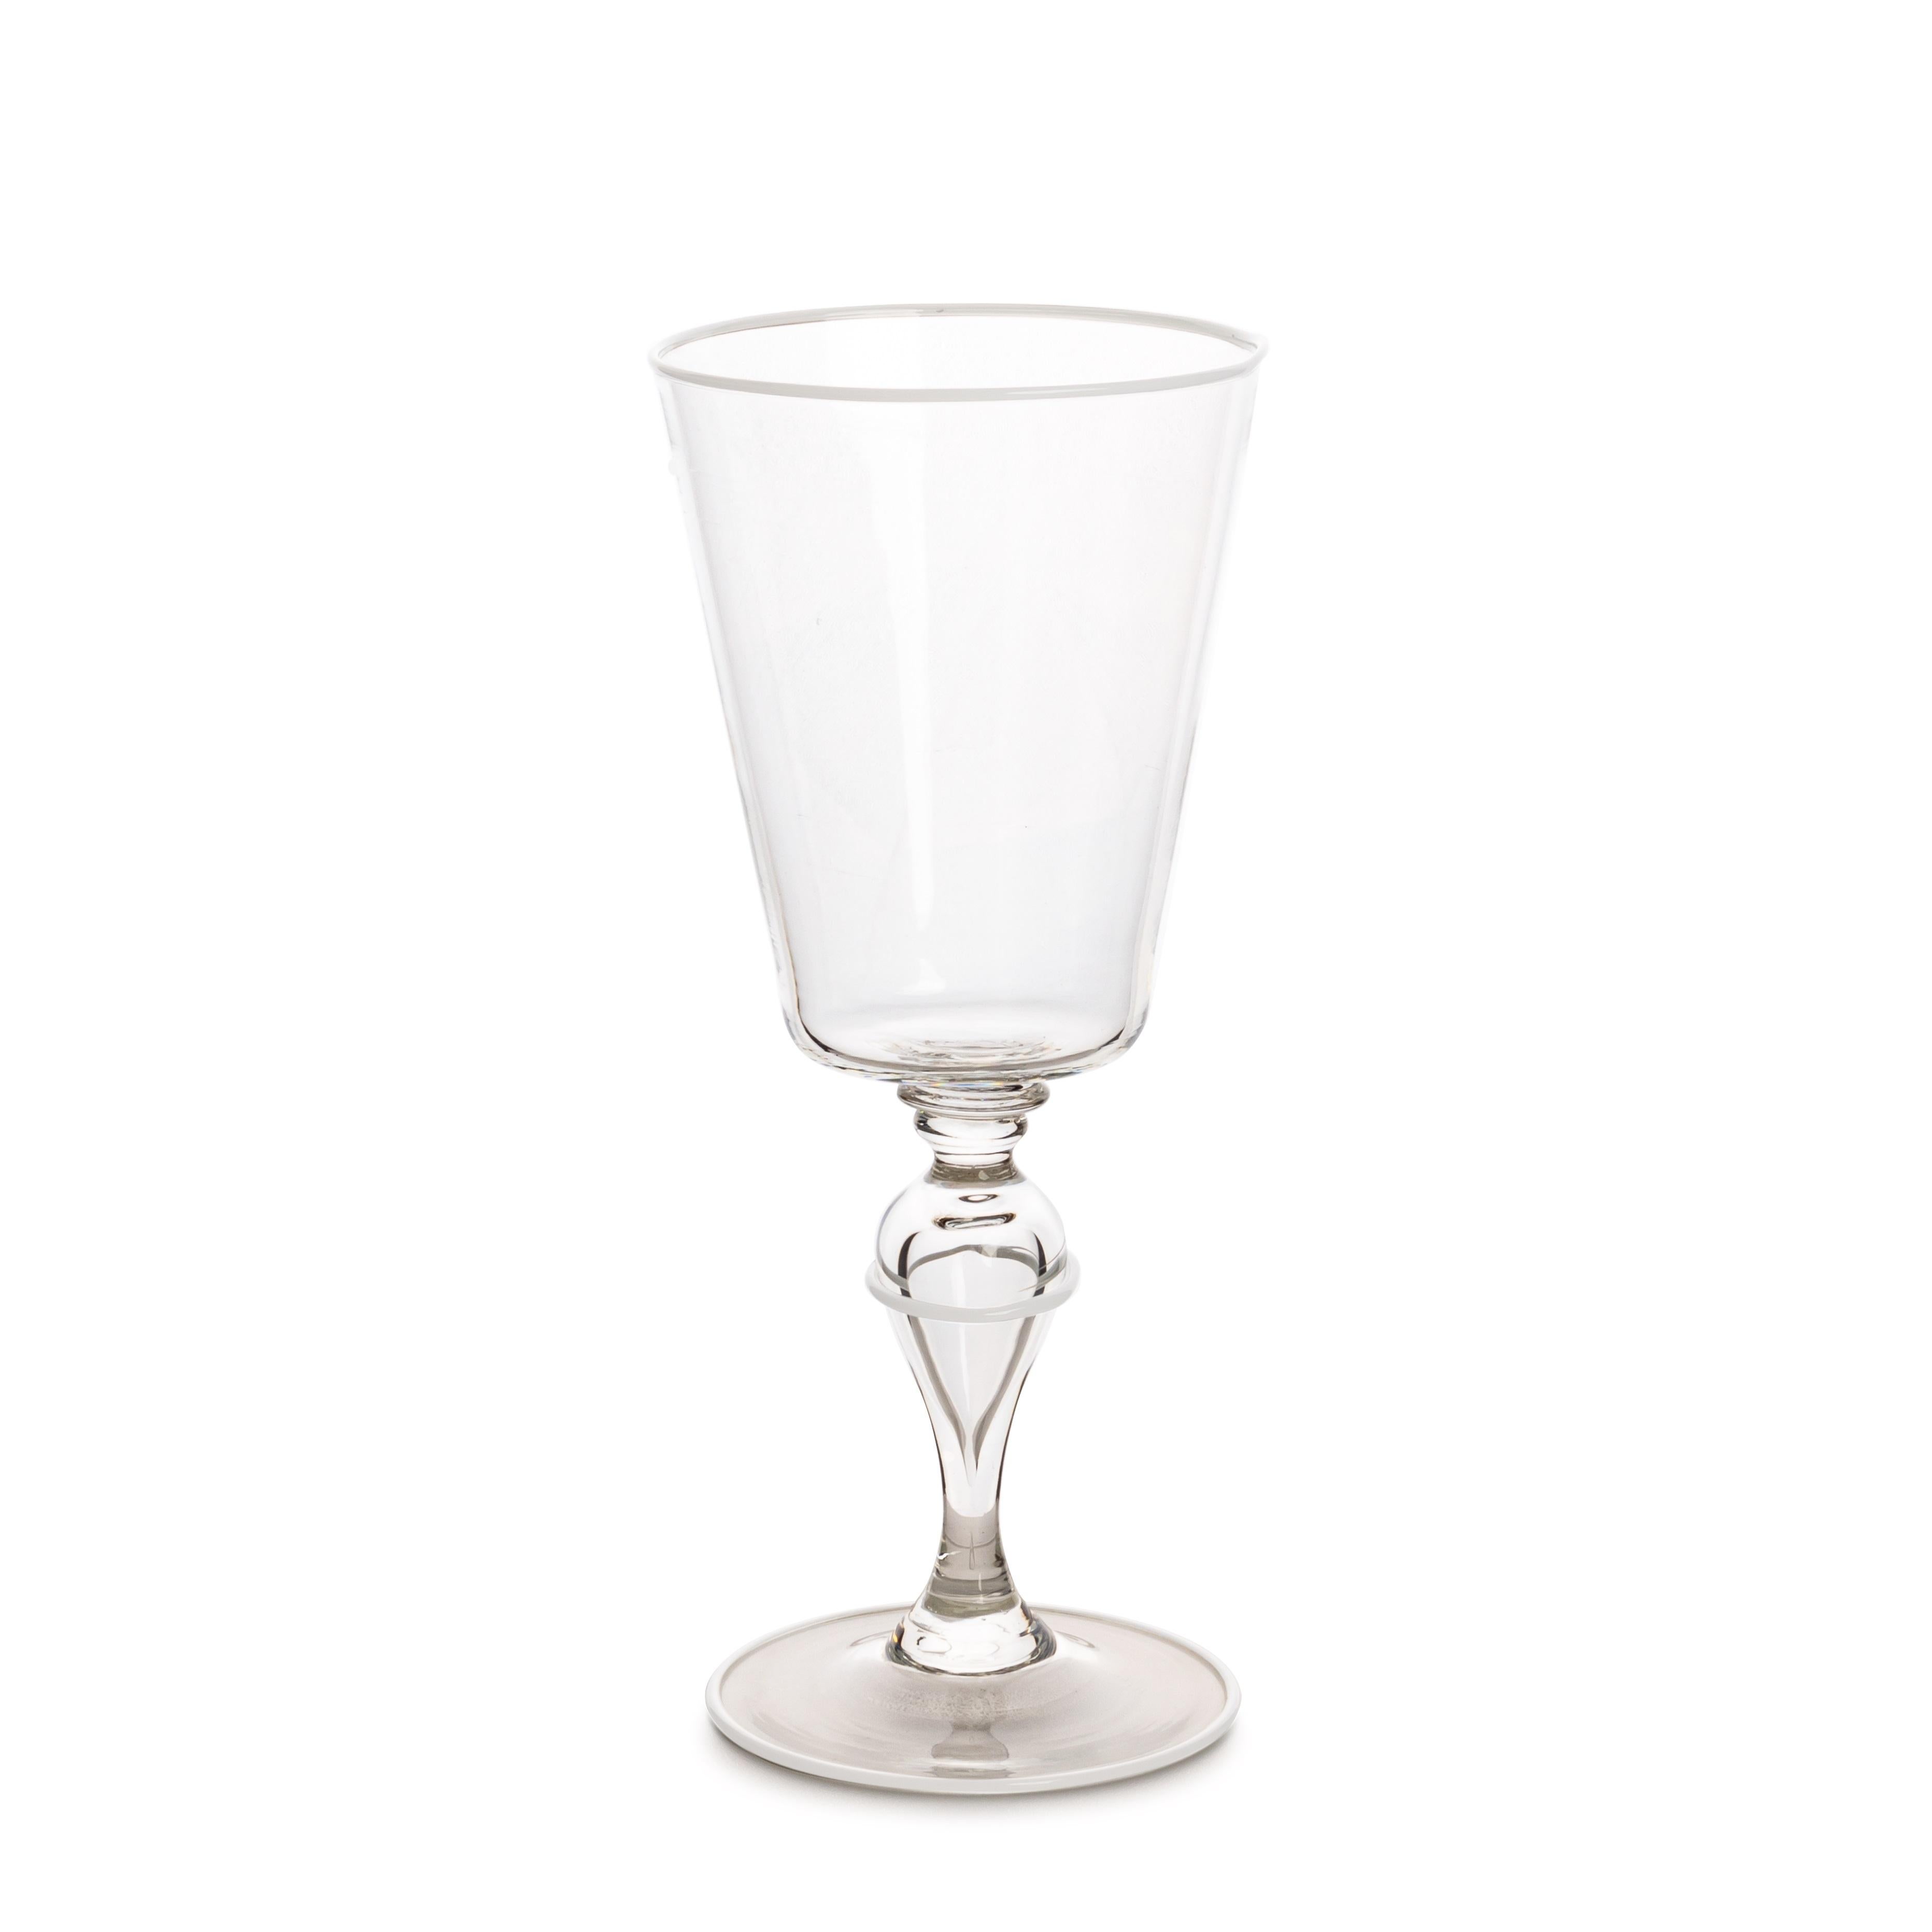 This collection was born from our meeting with an incredible glass master on the island of Murano in Venice. This Maestro is one of the last specialized only in goblets and tumblers made entirely by mouth and hand. No molds are used and the parts of